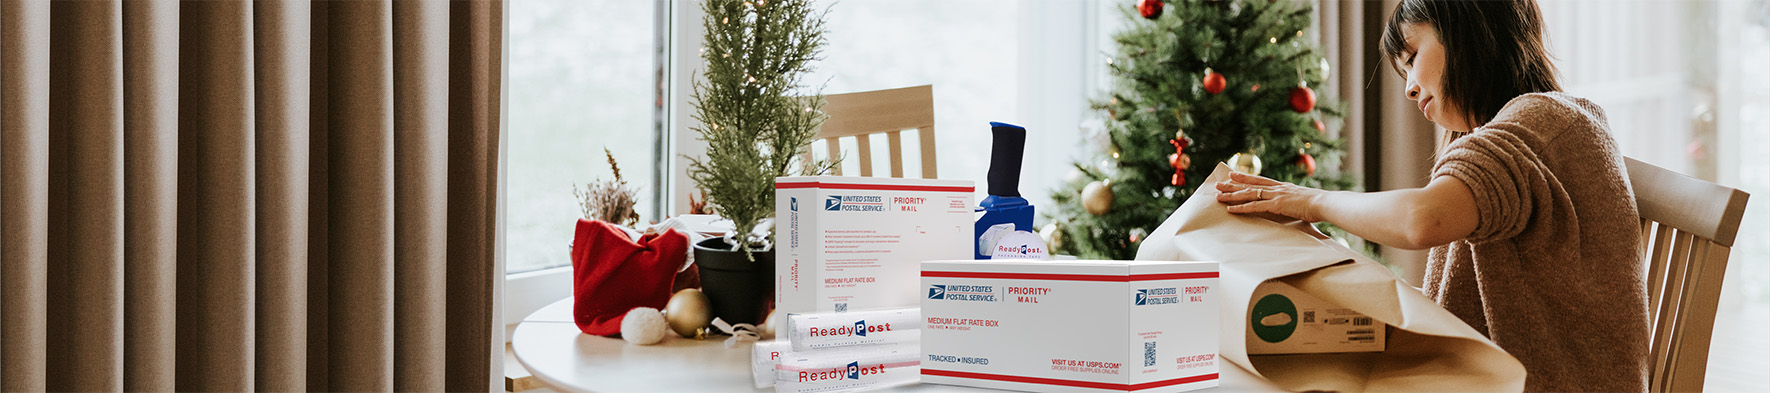 Woman wrapping holiday gifts with USPS shipping supplies on the table.